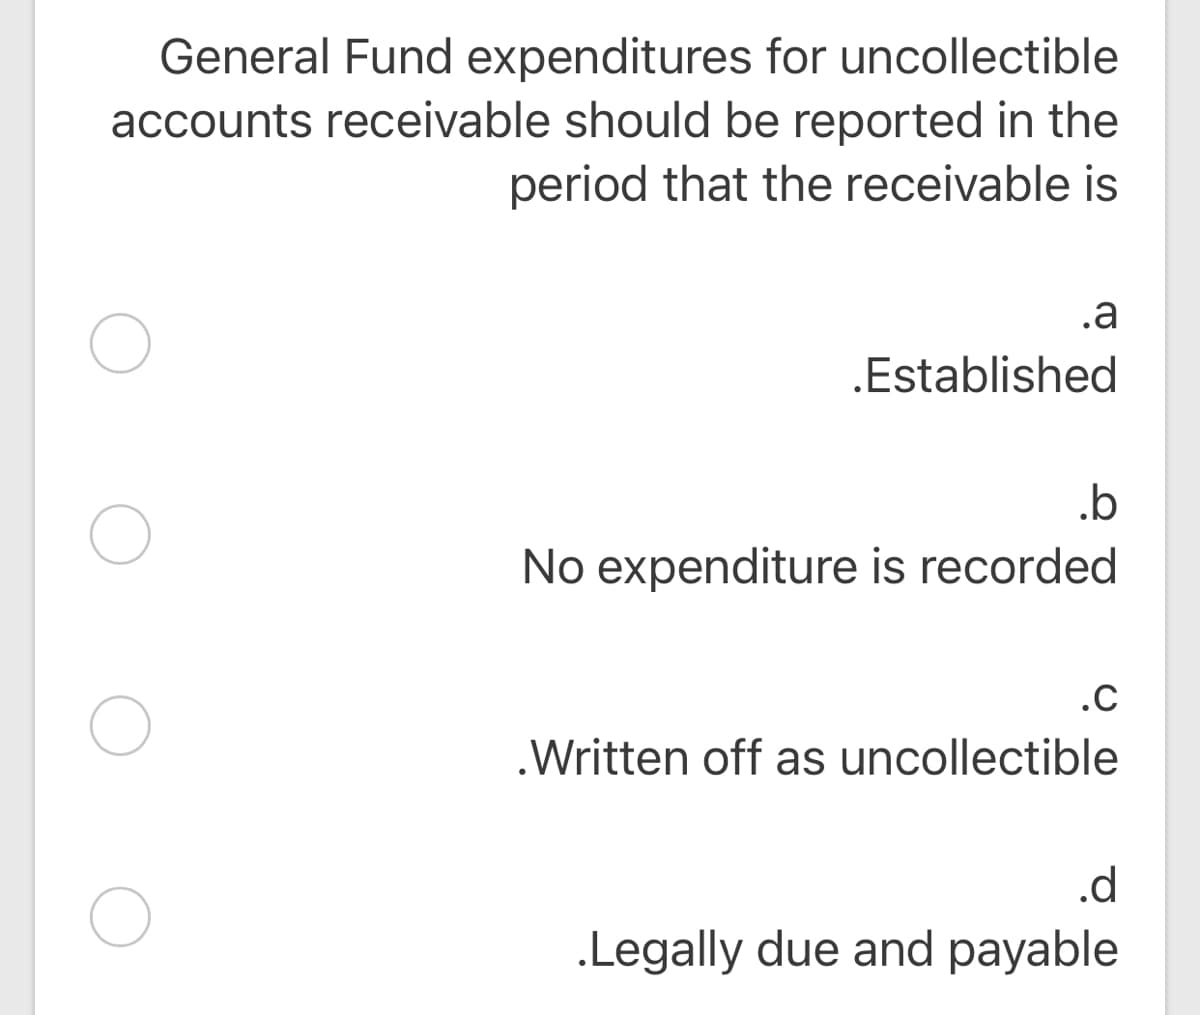 General Fund expenditures for uncollectible
accounts receivable should be reported in the
period that the receivable is
.a
.Established
.b
No expenditure is recorded
.C
.Written off as uncollectible
.d
.Legally due and payable
